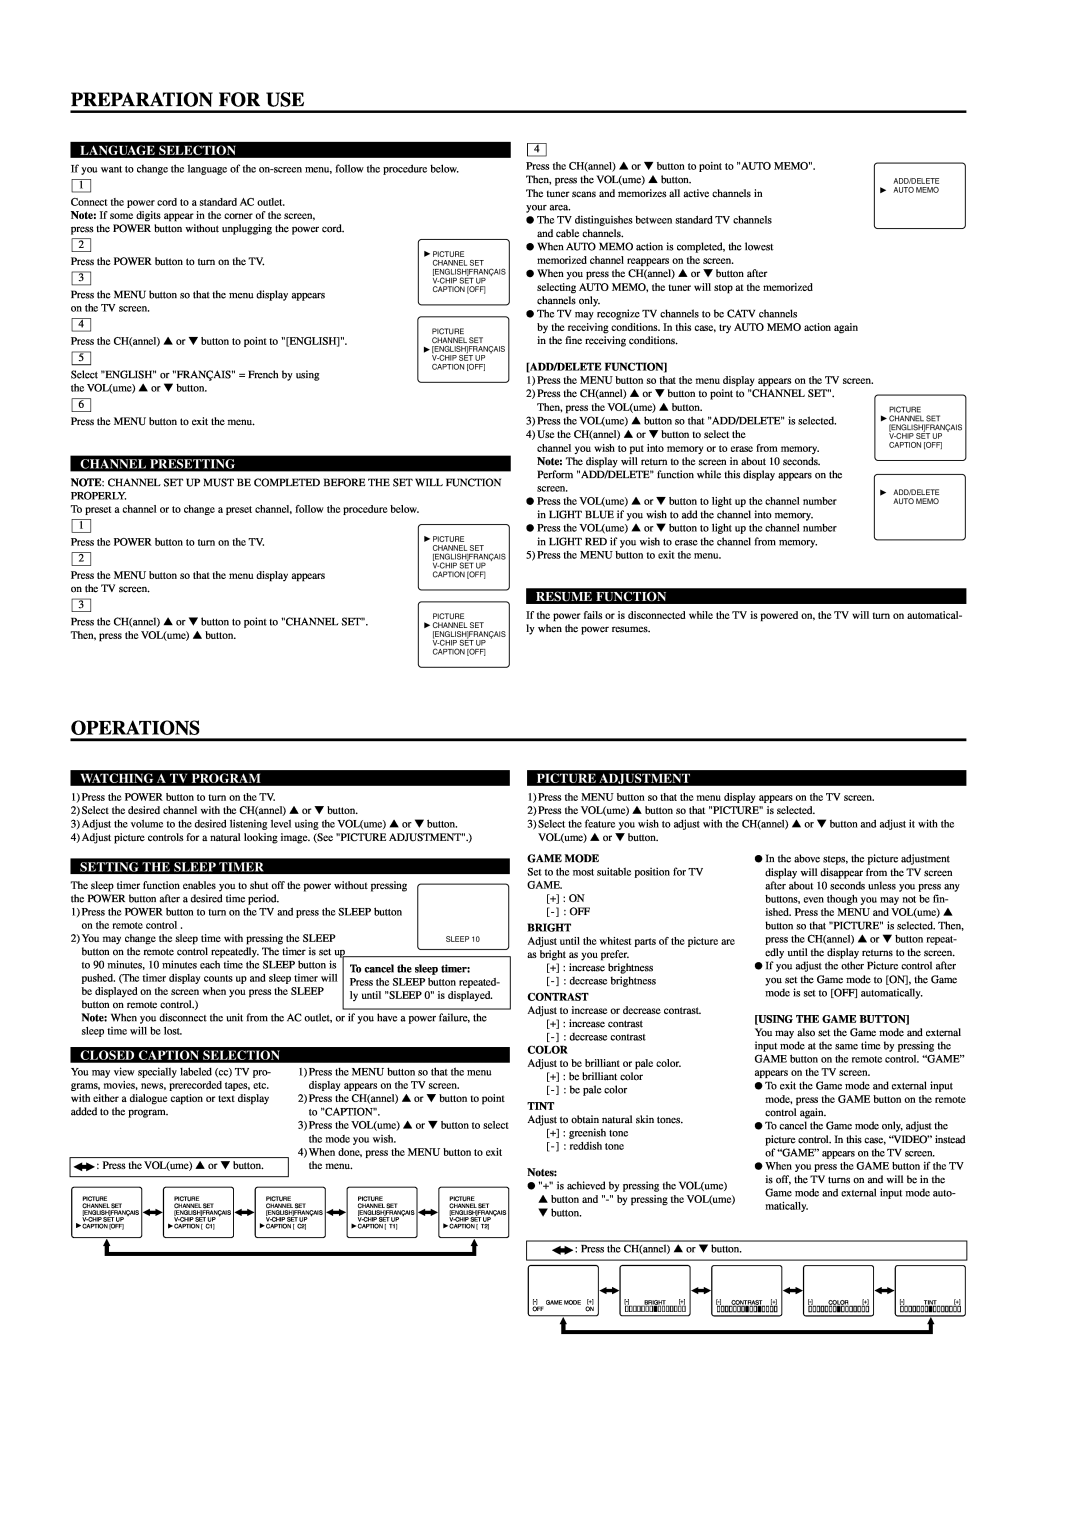 Sylvania C6413TD, C5419TD Preparation For Use, Operations, Language Selection, Channel Presetting, Resume Function 